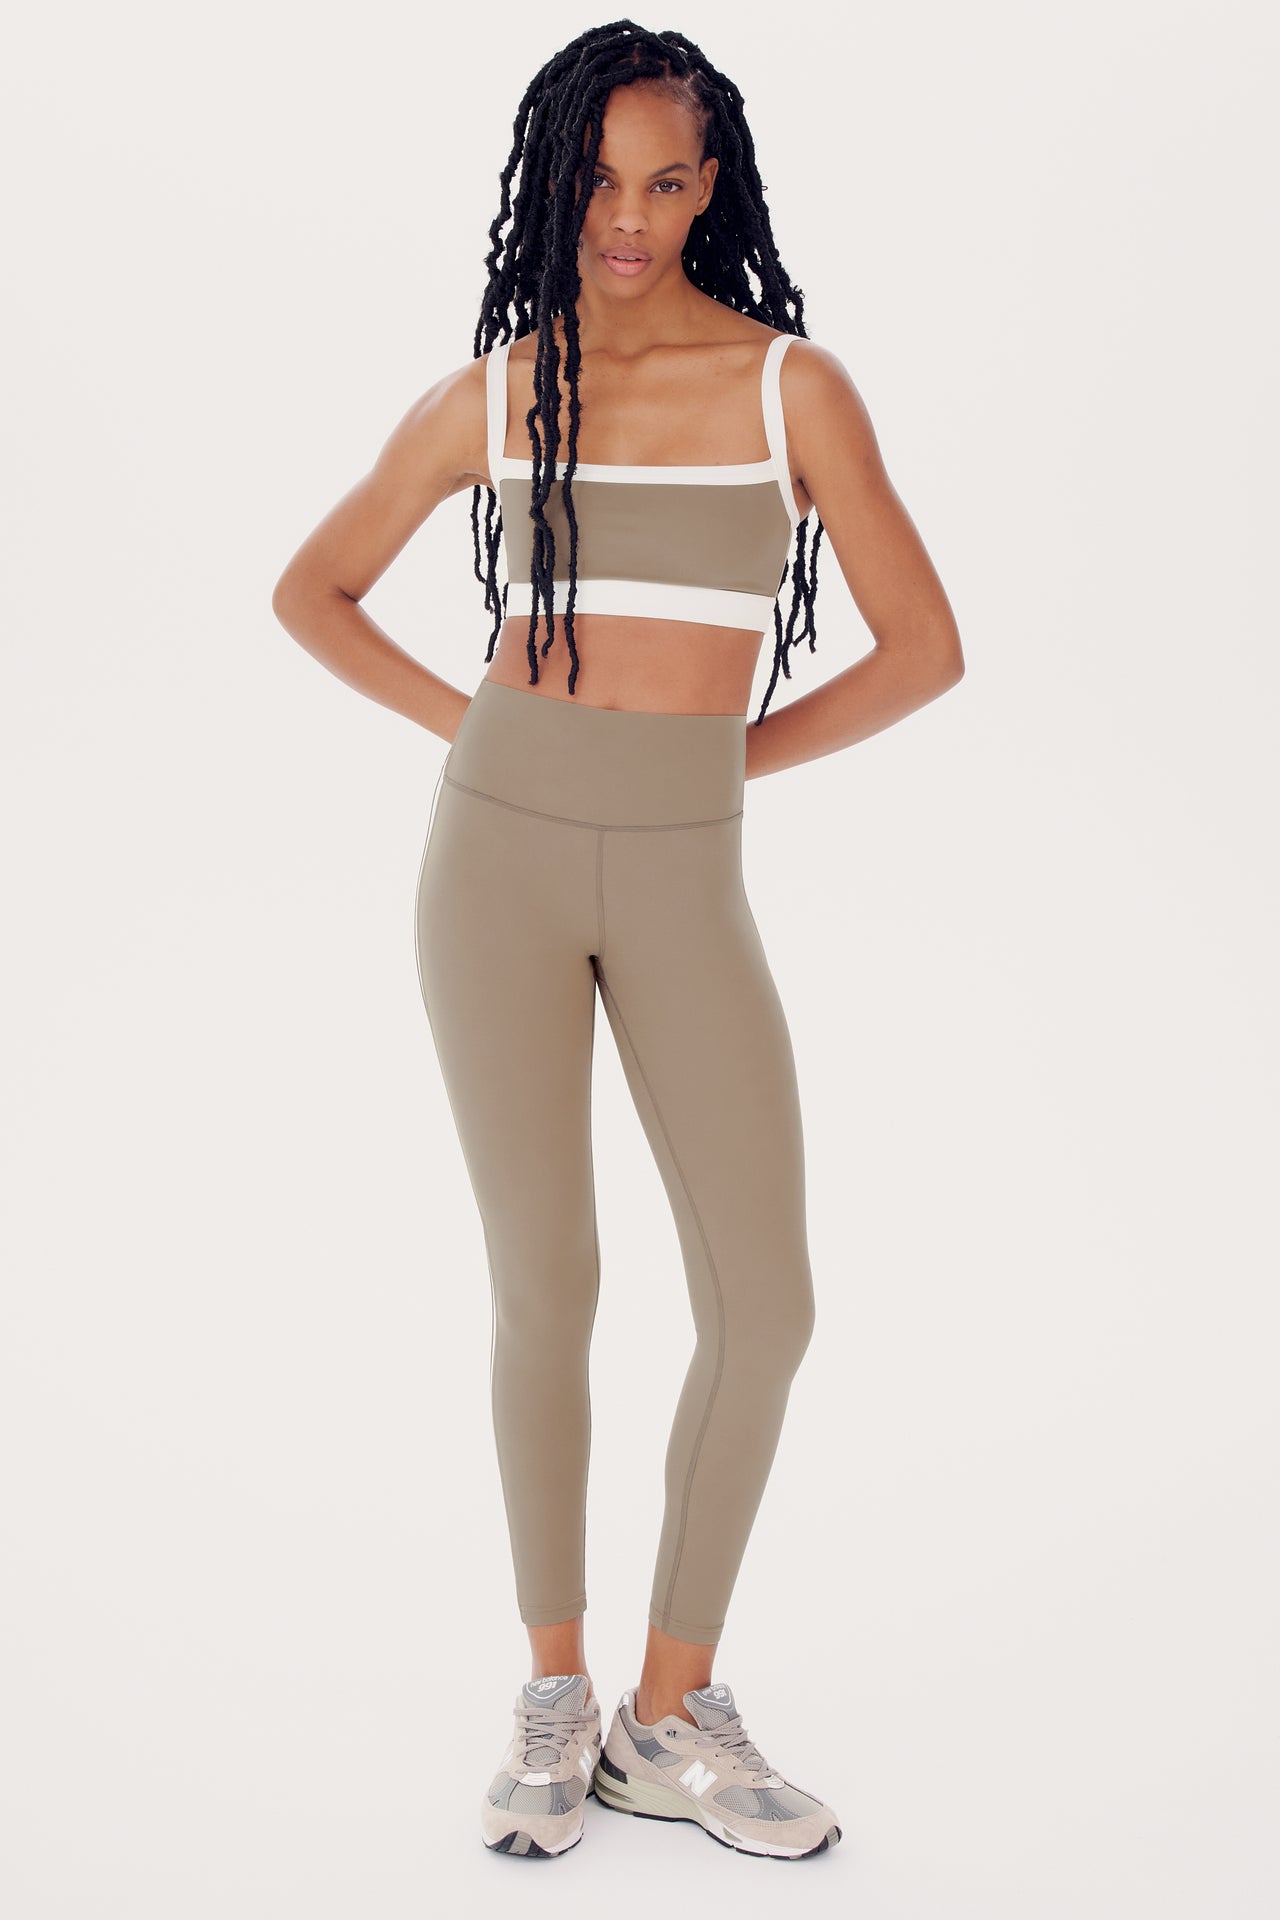 A woman in a beige sports bra and SPLITS59's Clare High Waist Rigor 7/8 - Latte/White leggings posing in a studio, with long braided hair and neutral-toned sneakers.